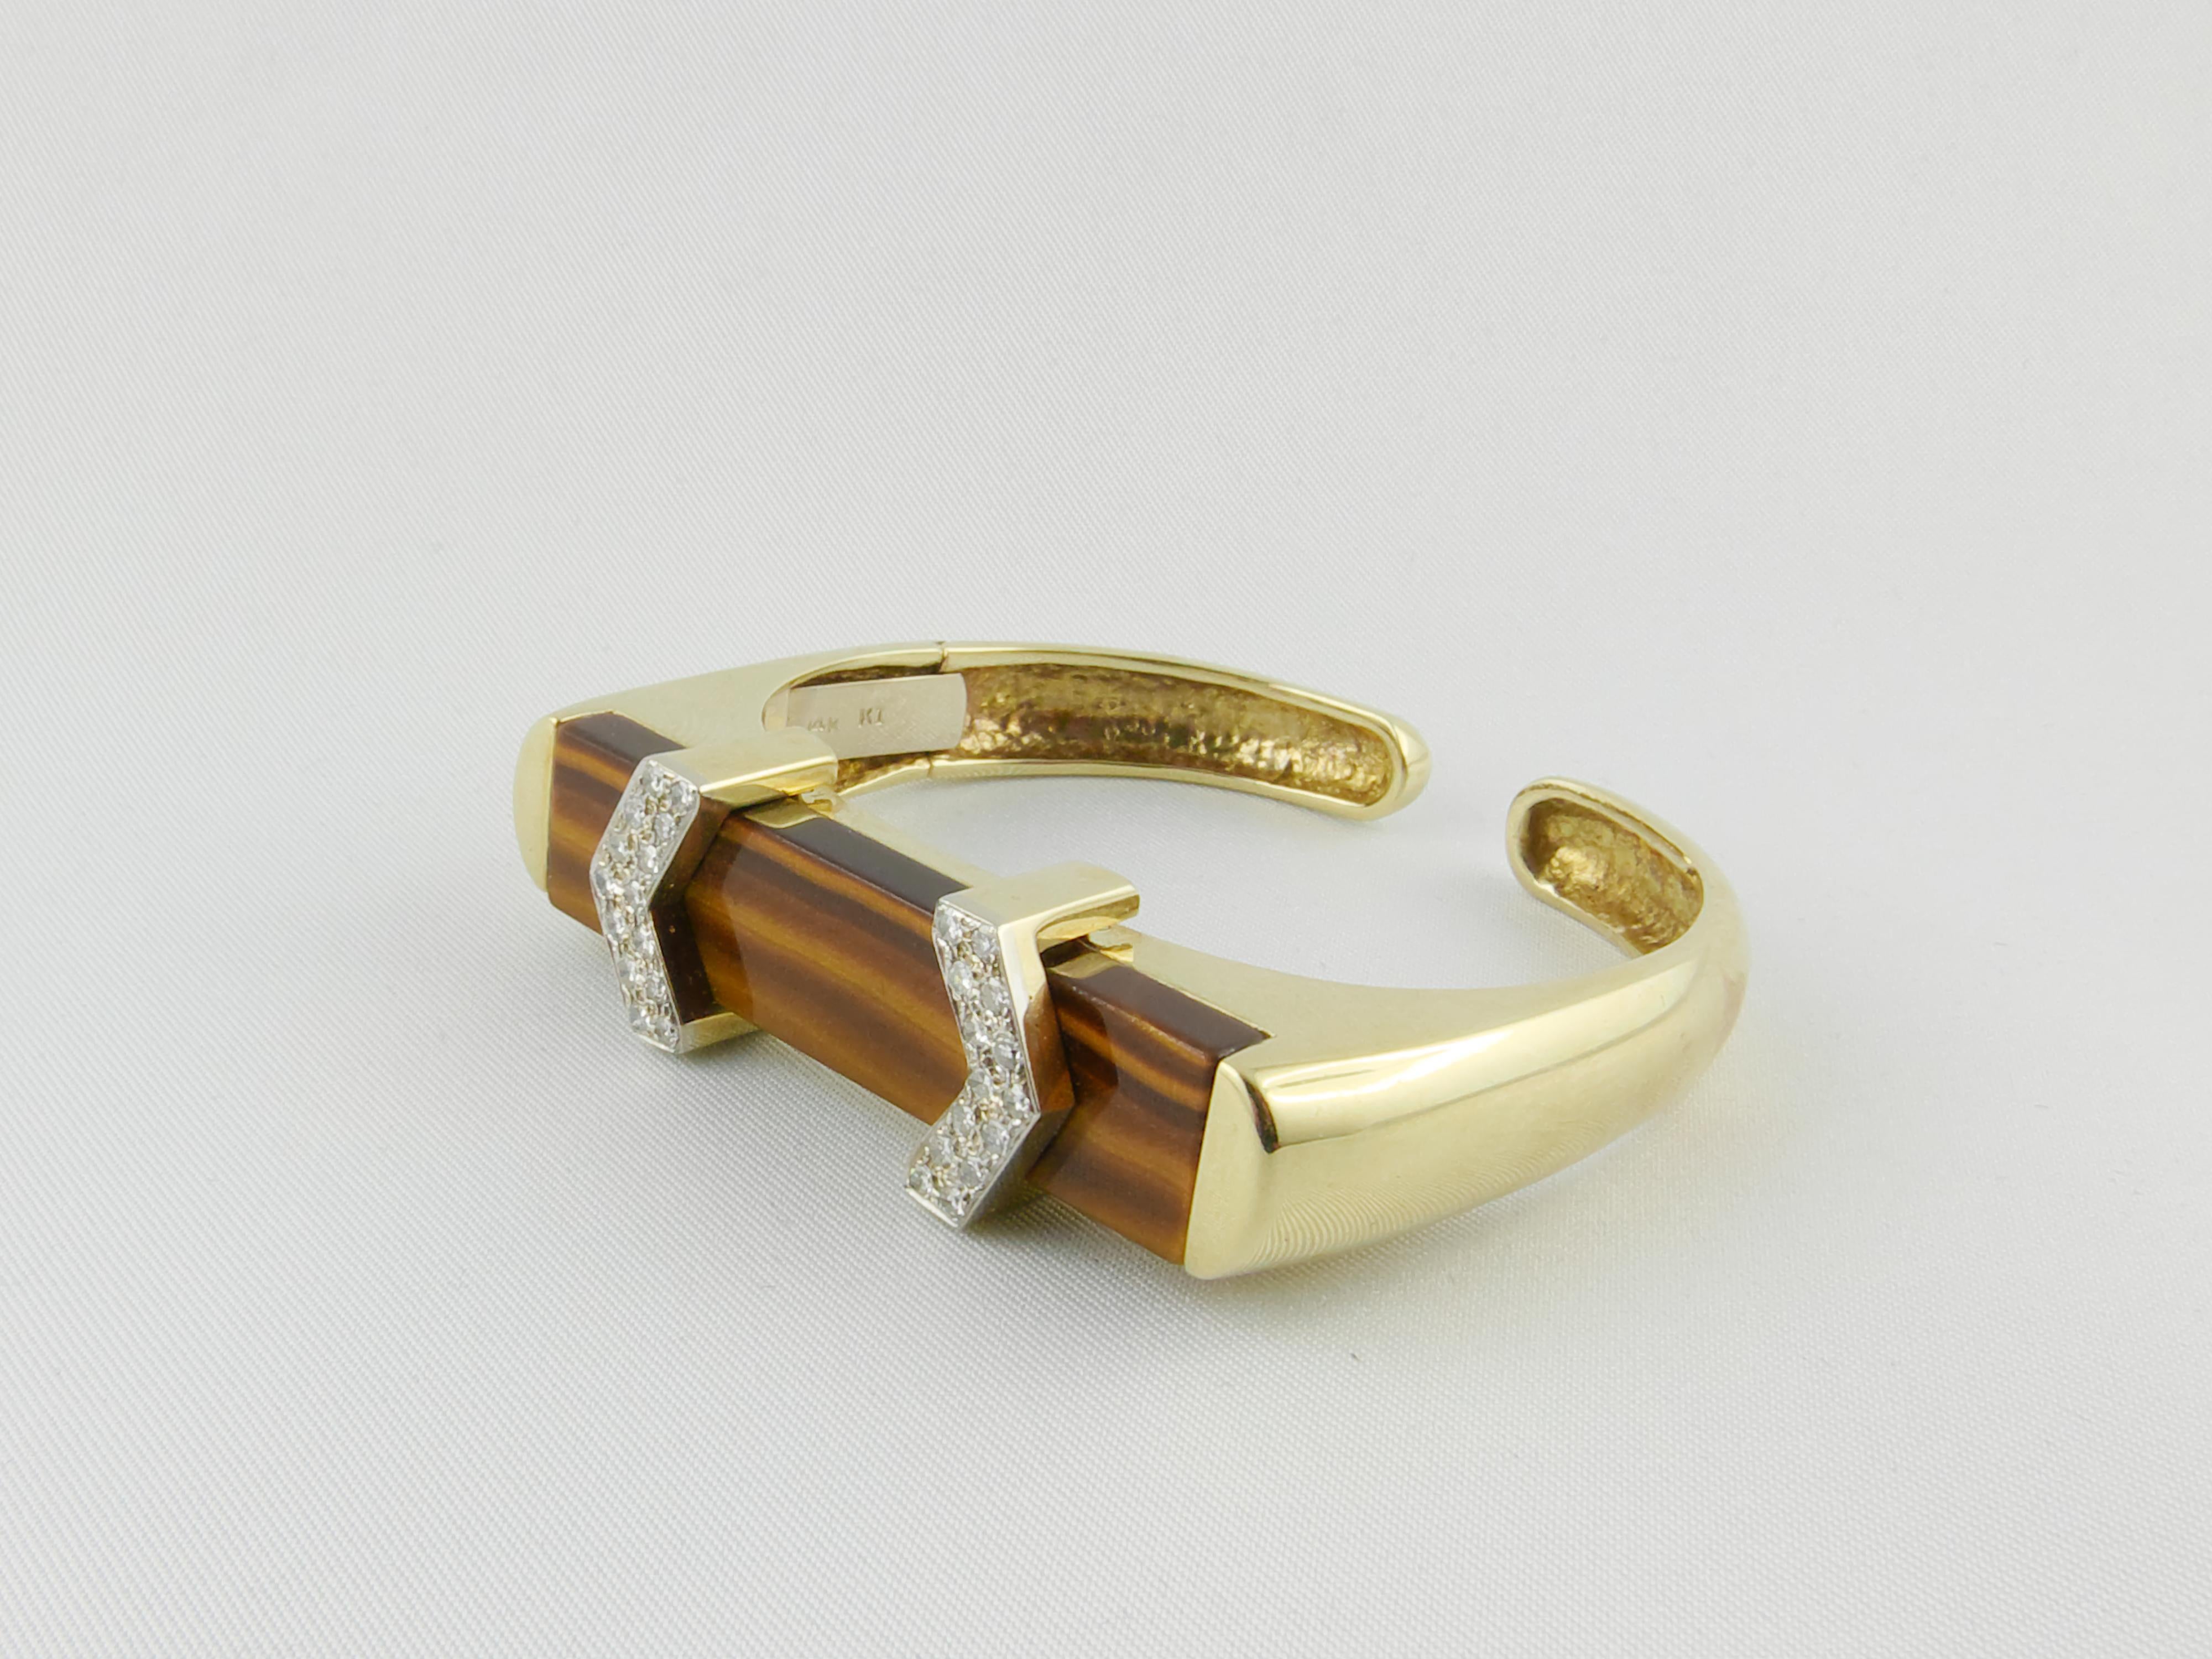 This stylish and glamourous 1970s Bangle Bracelet is finely crafted in Yellow Gold with a Tiger’s Eye  central insert and it is set with two arrow-shaped lateral strips of Diamonds. The bold and geometric design makes it chic, fashionable and